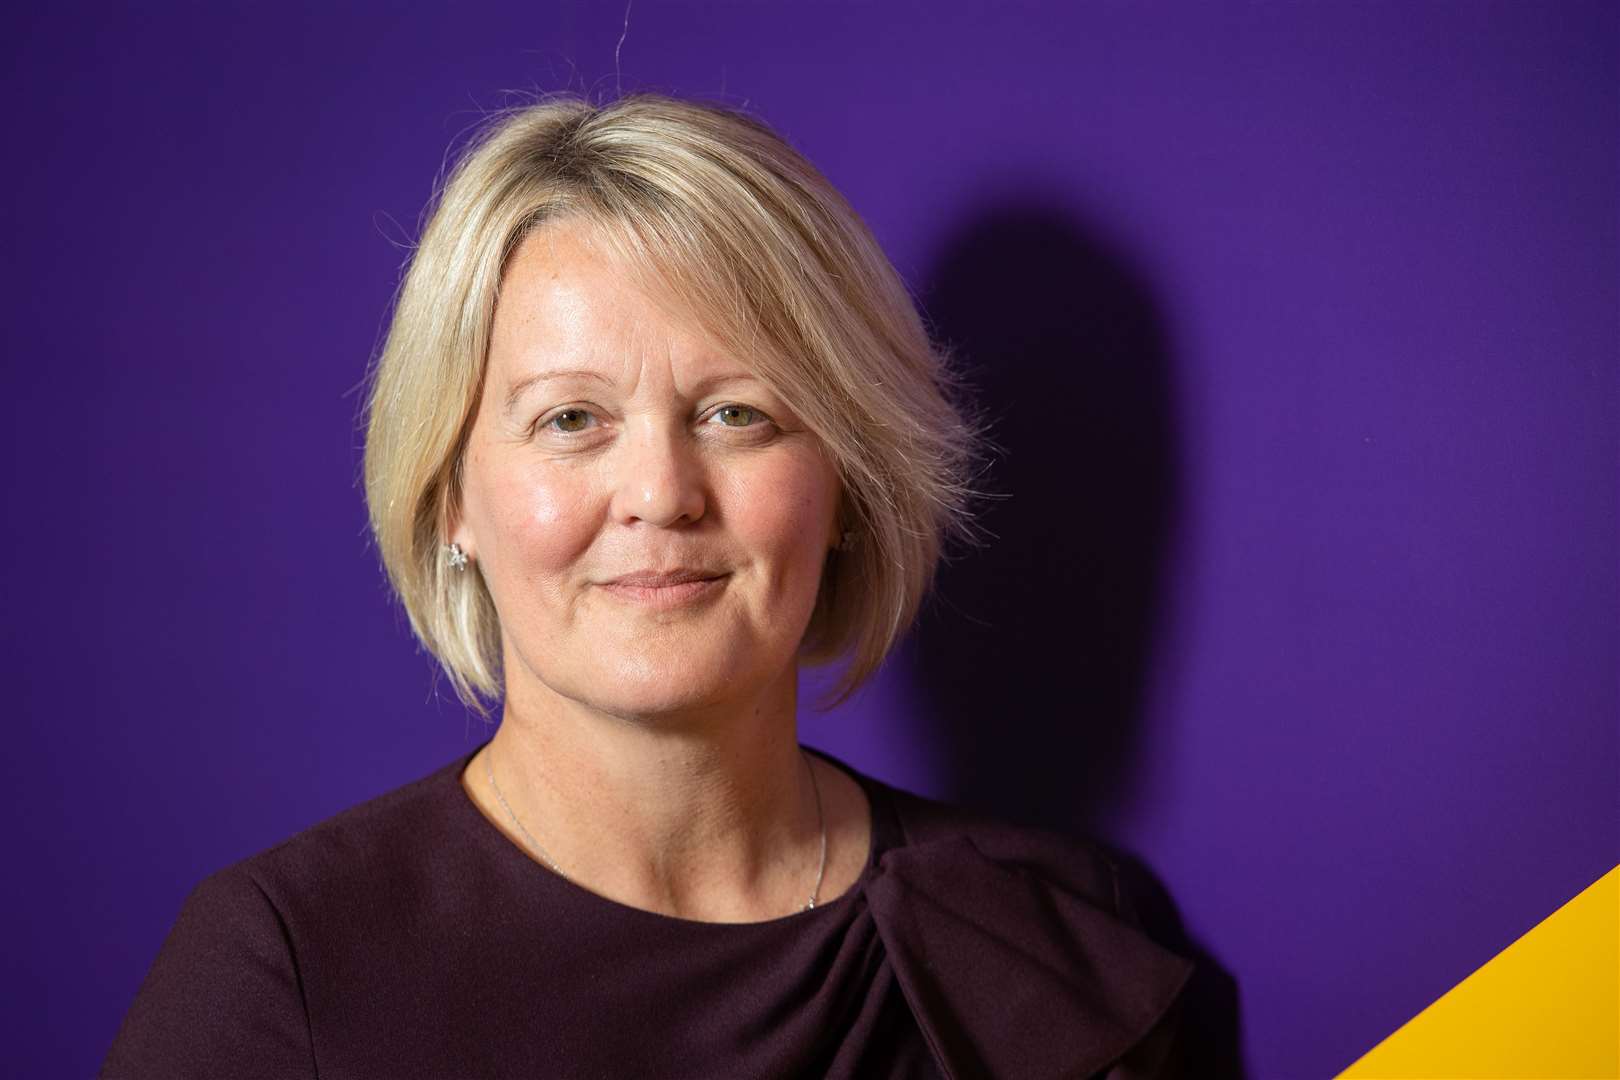 NatWest chief executive Officer Alison Rose (Dominic Lipinski/PA)